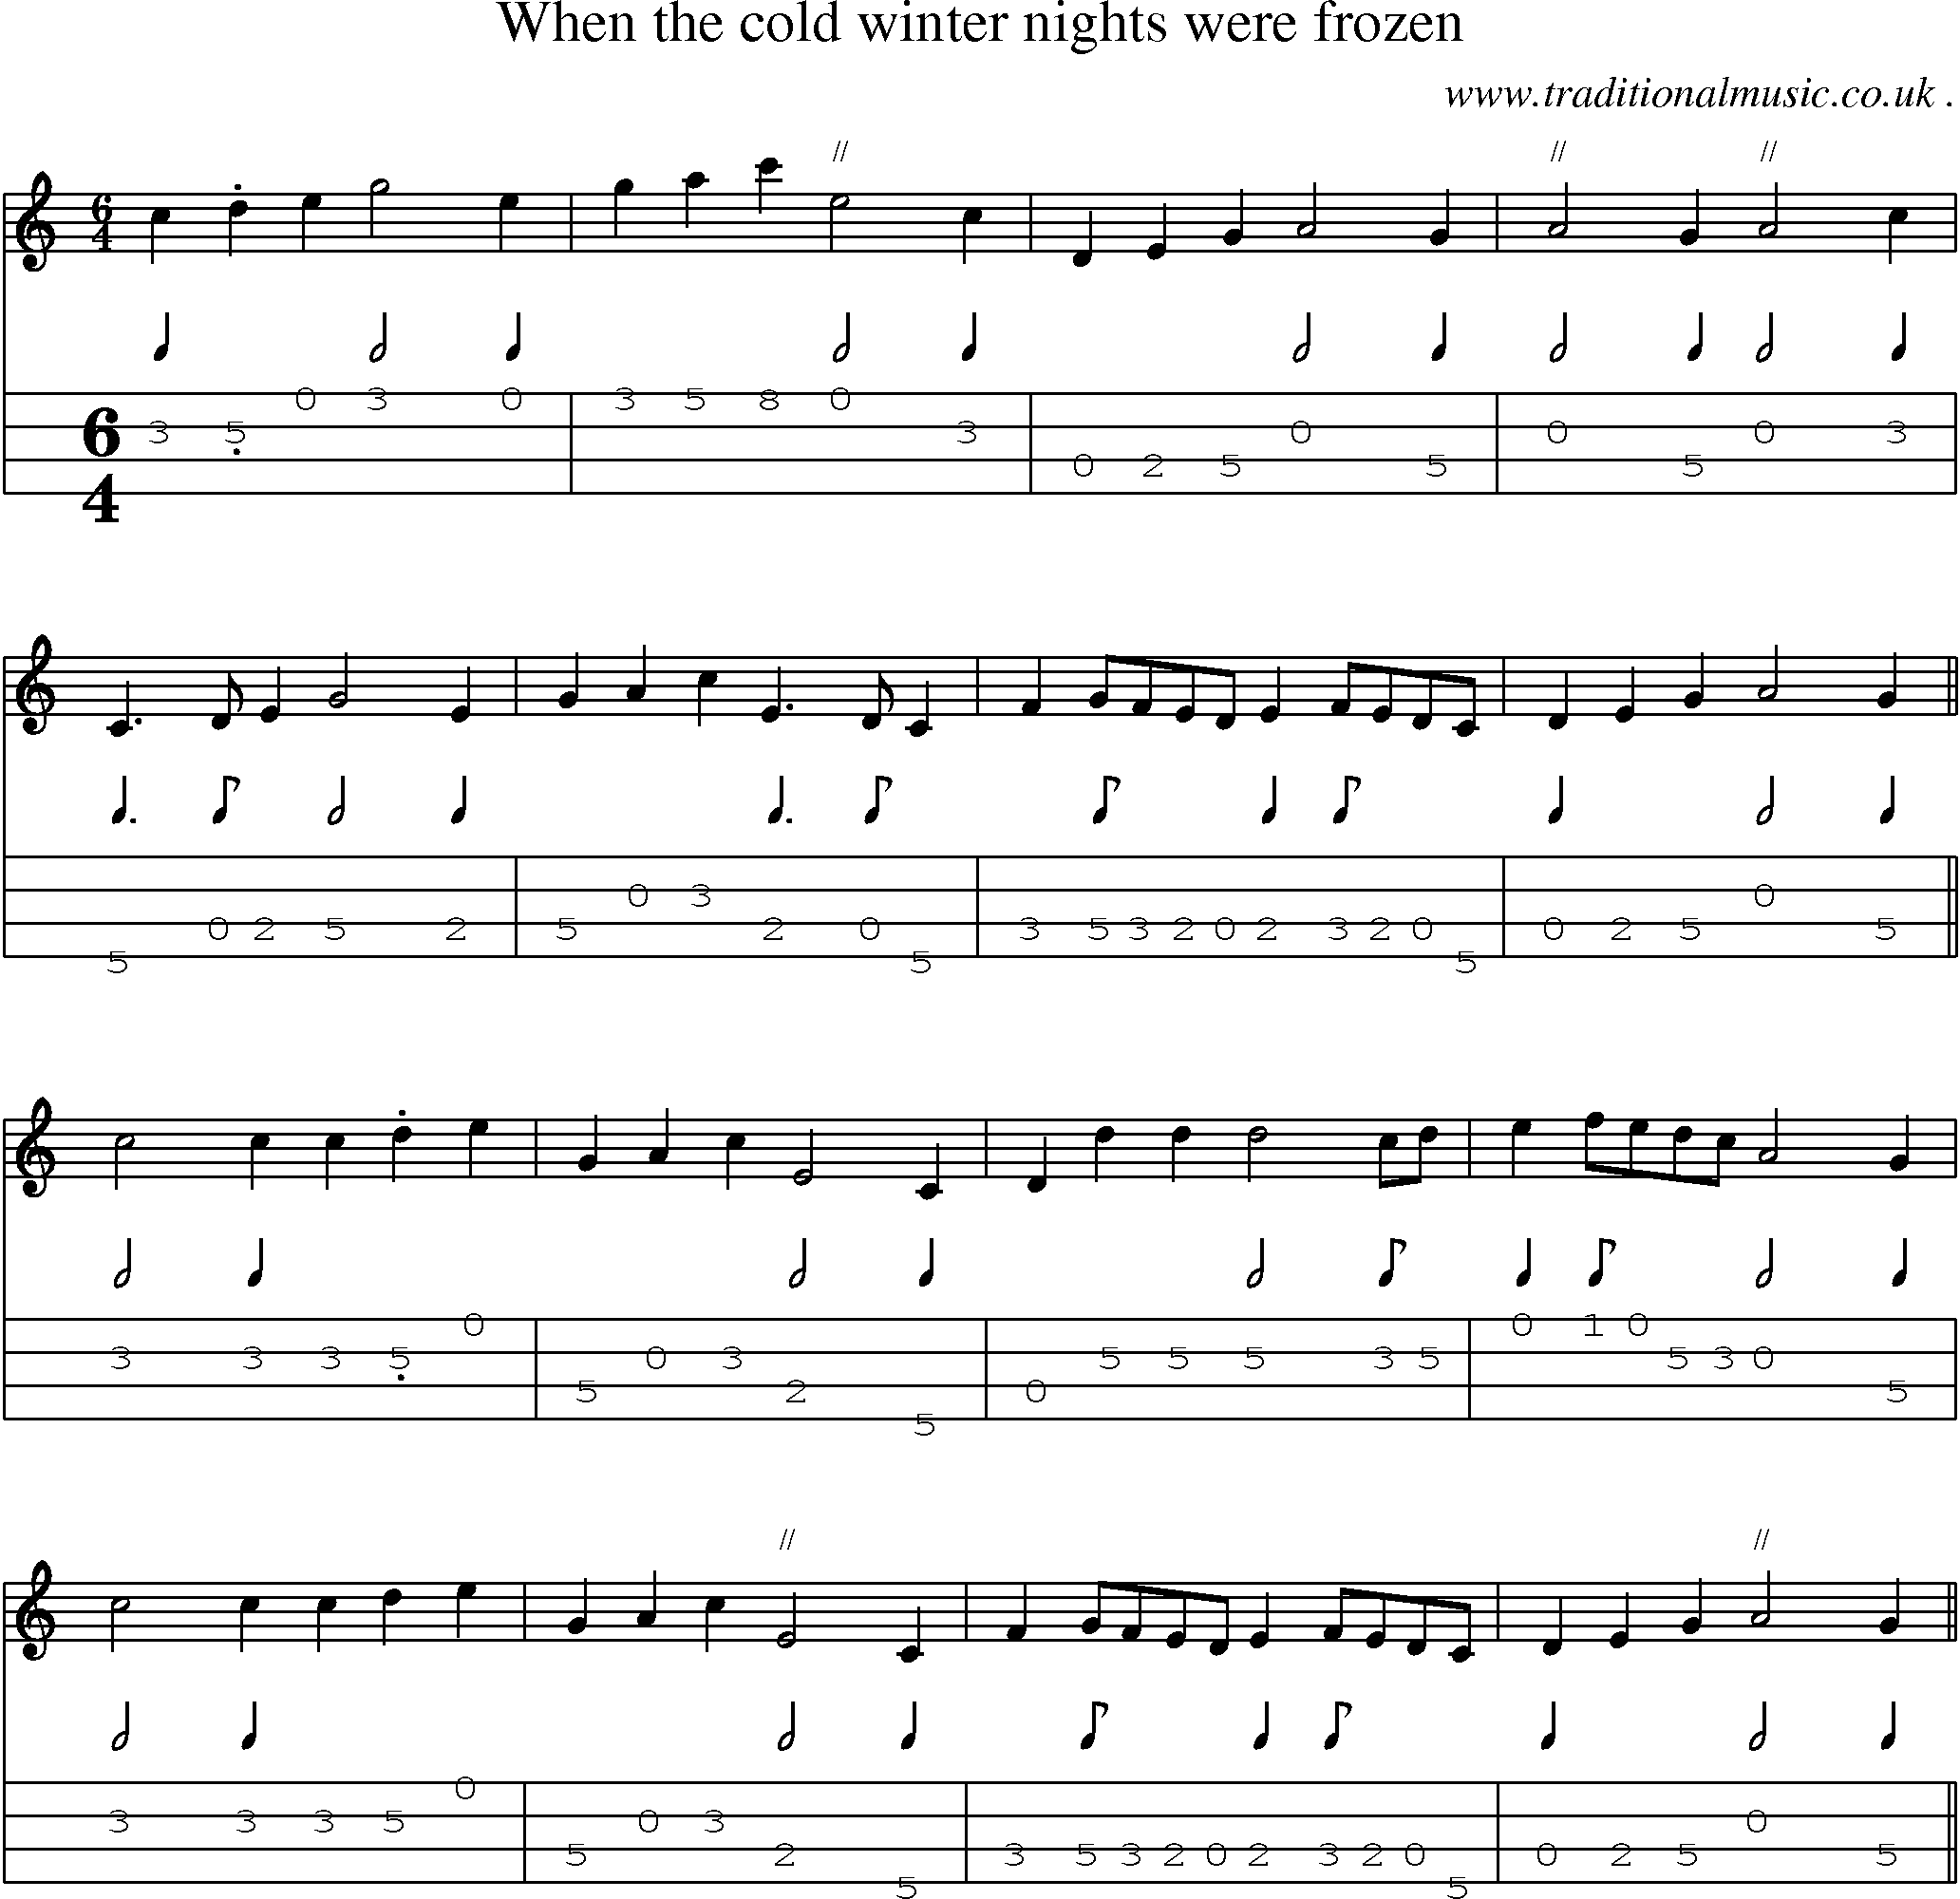 Sheet-music  score, Chords and Mandolin Tabs for When The Cold Winter Nights Were Frozen